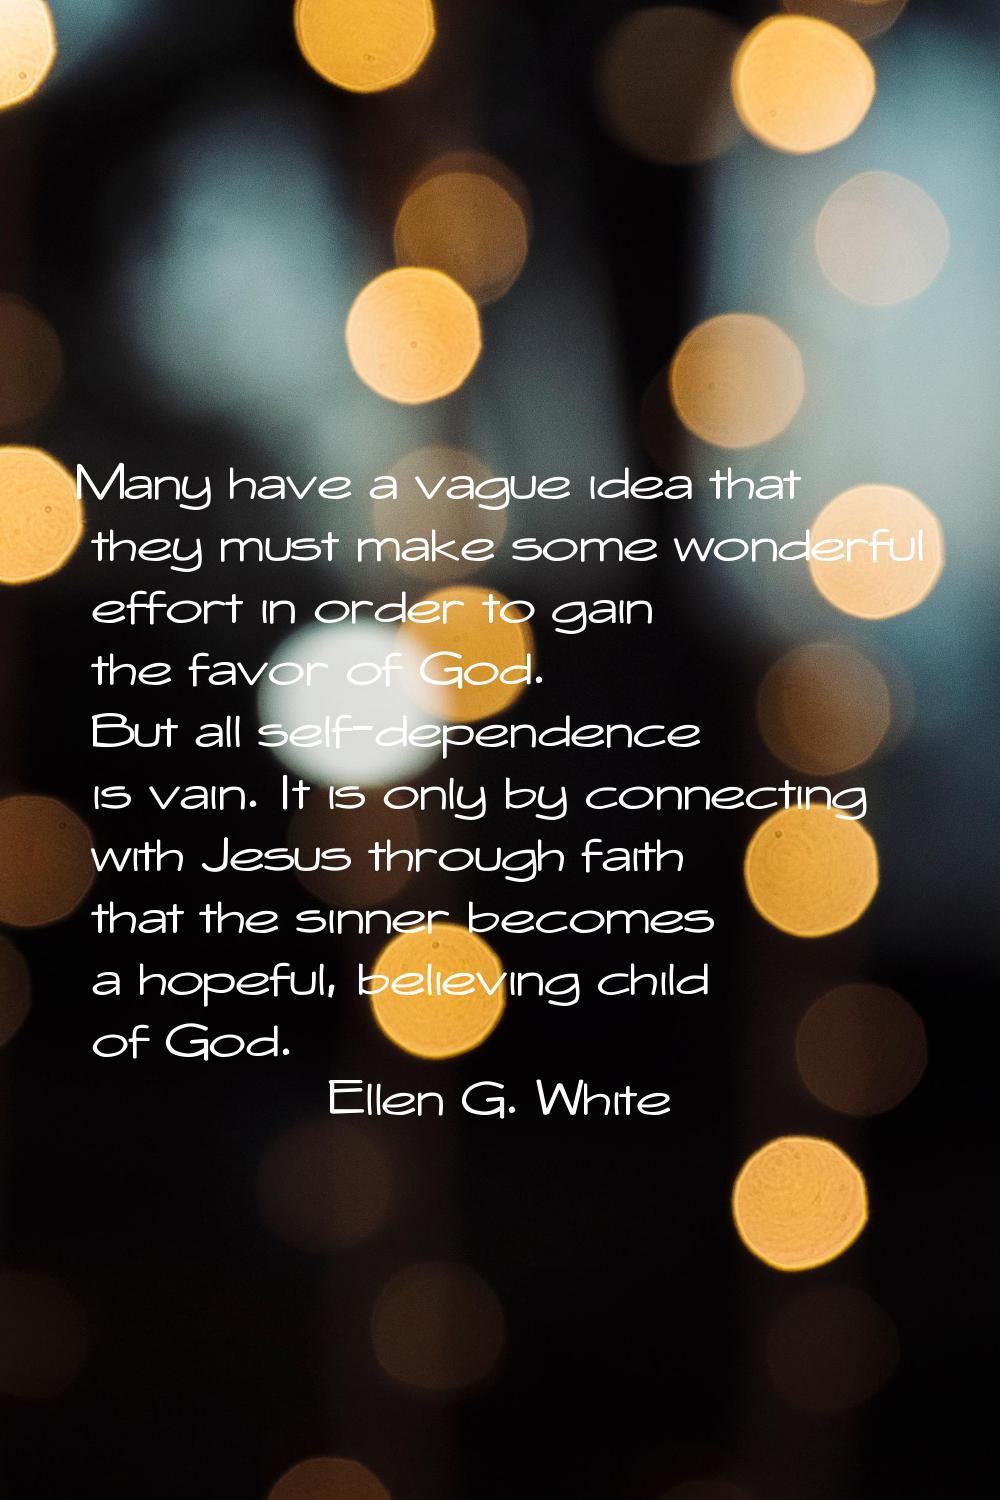 Many have a vague idea that they must make some wonderful effort in order to gain the favor of God.